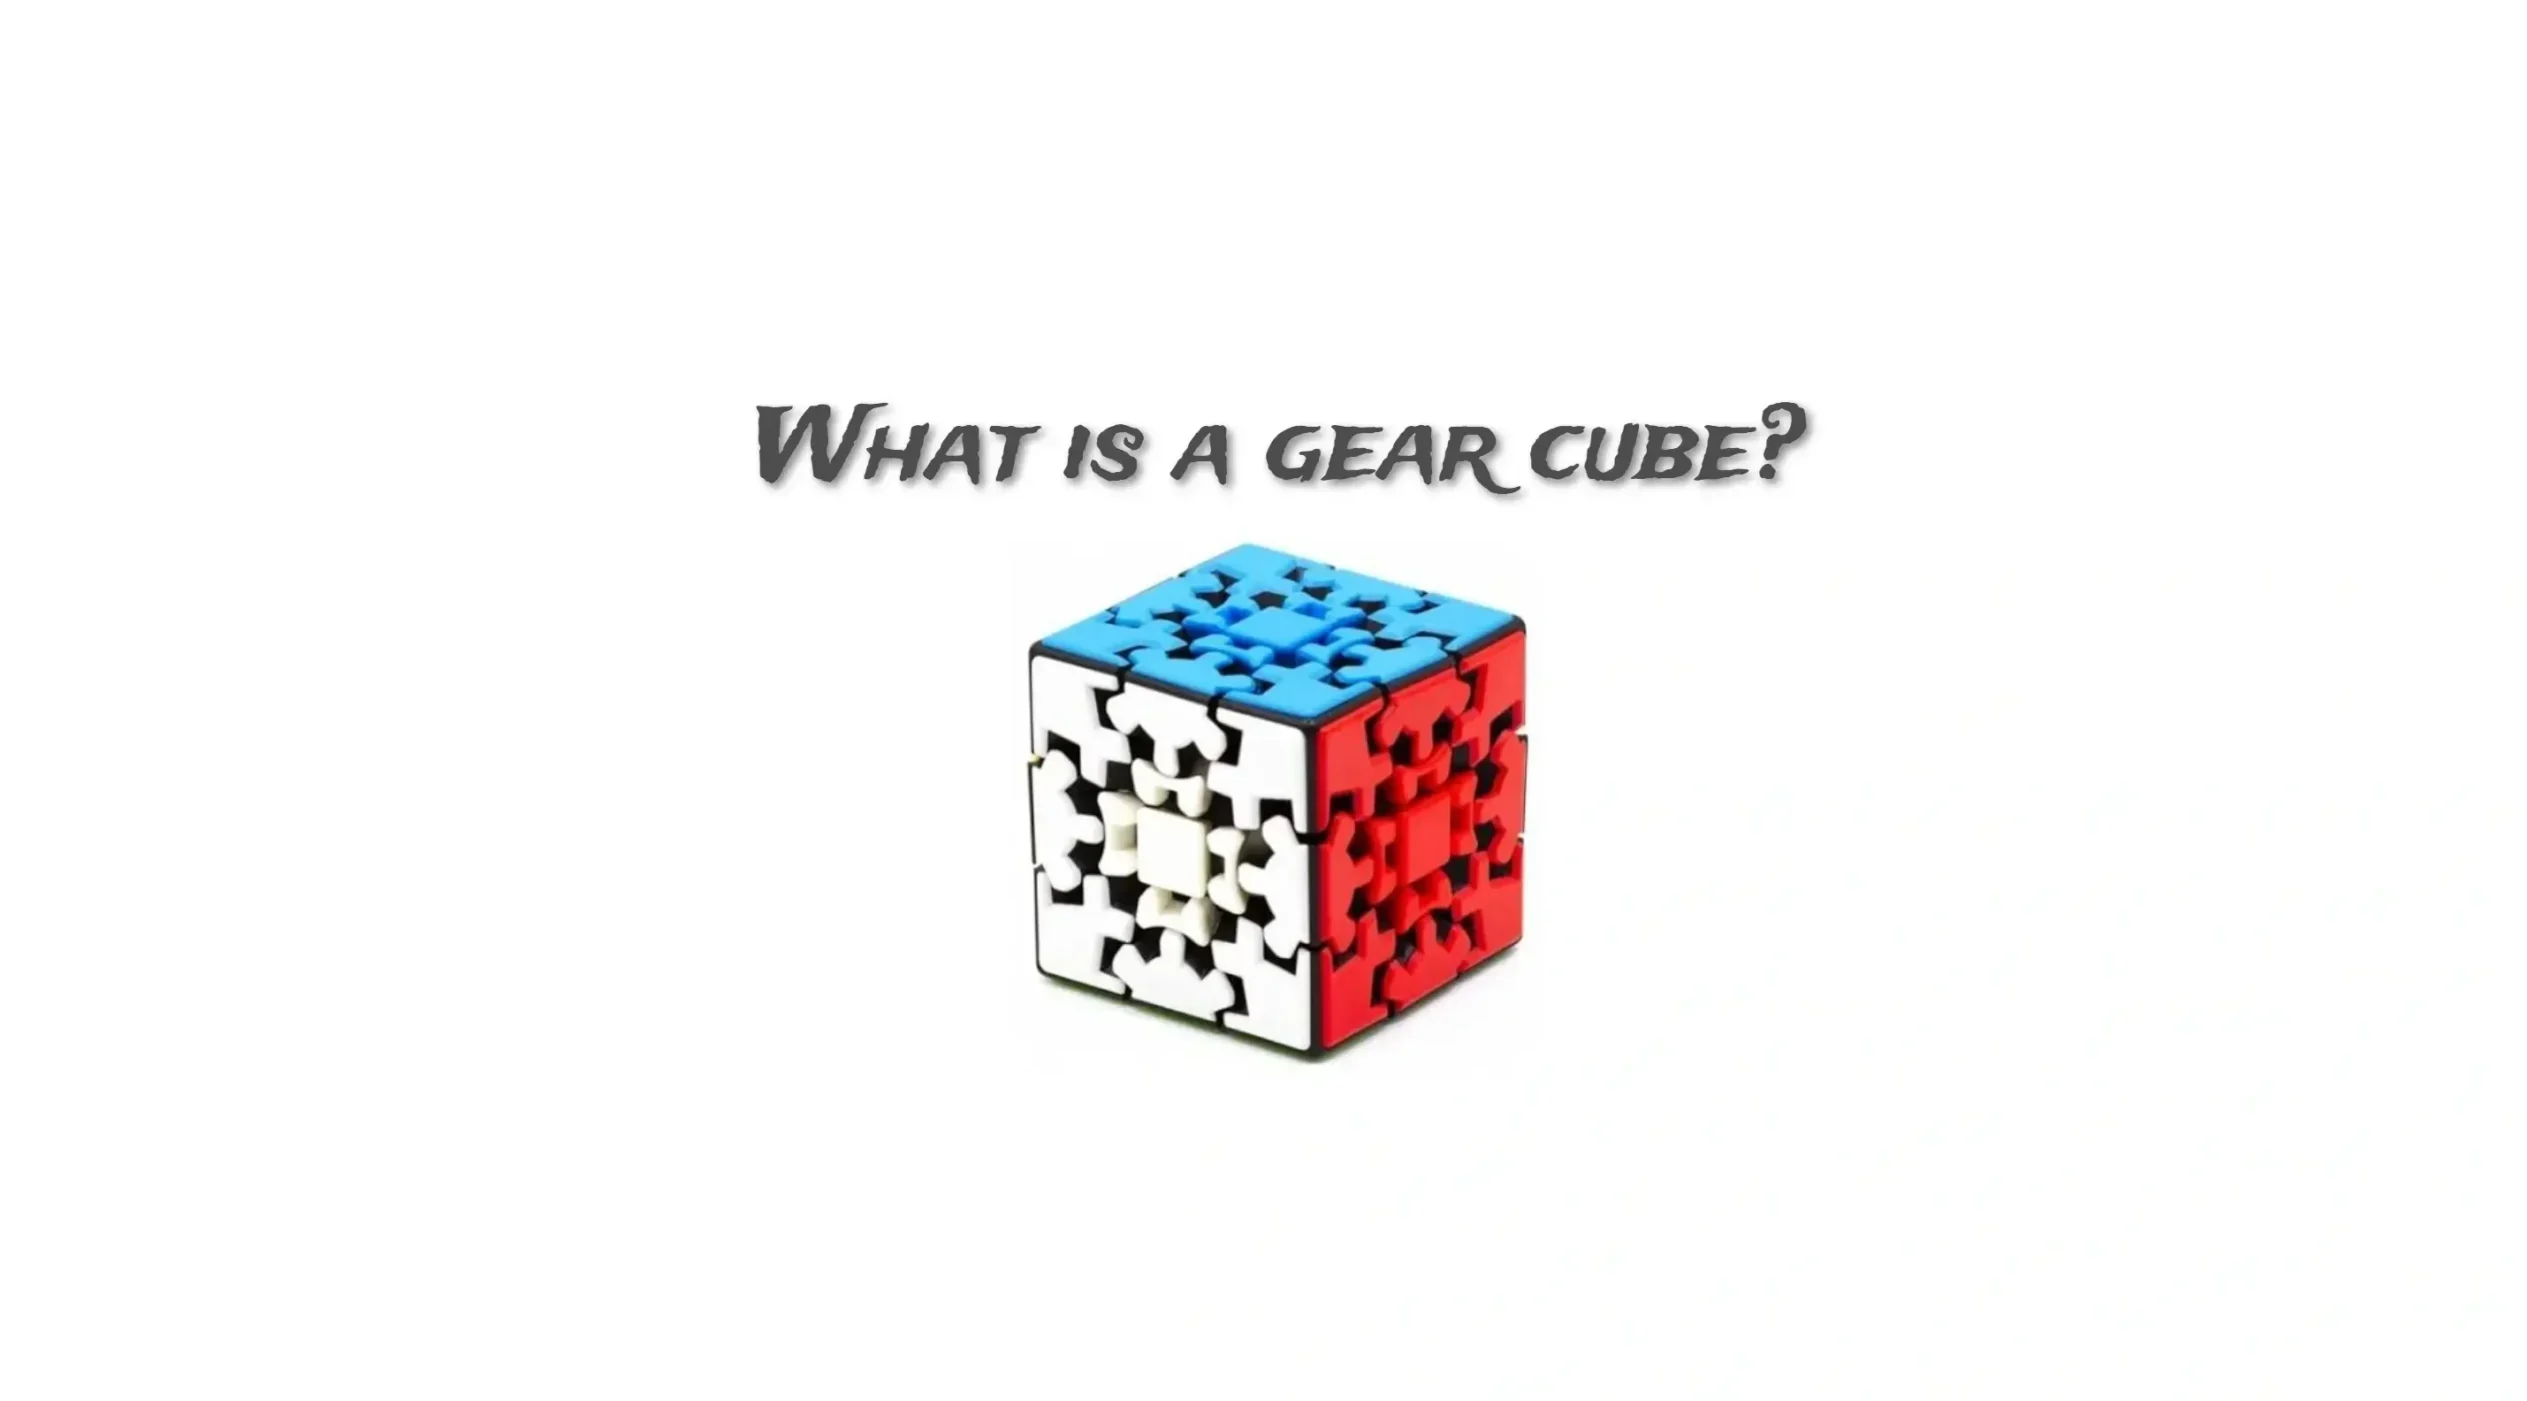 What is a gear cube?